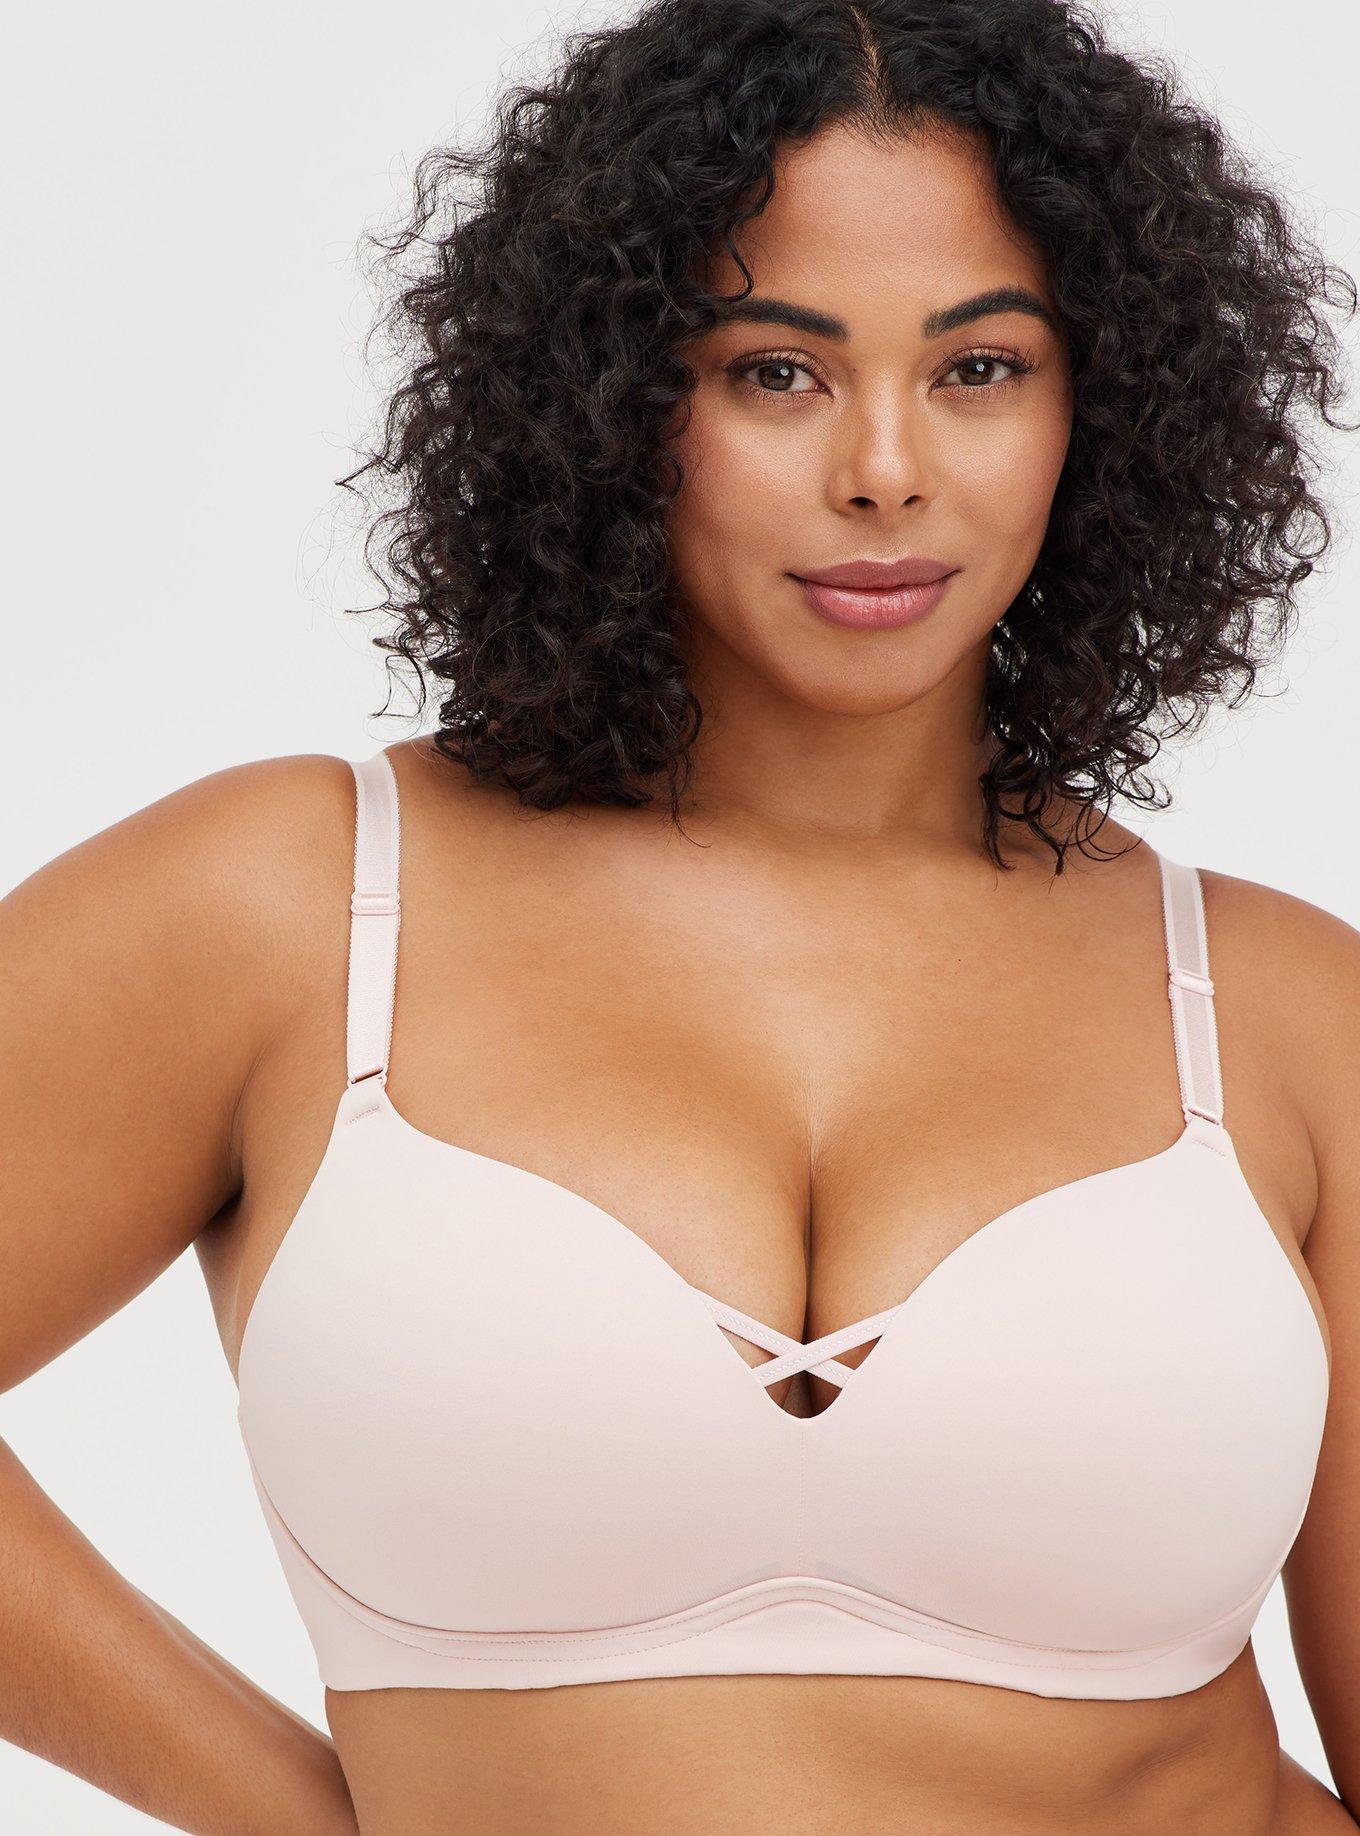 Torrid full coverage bra Size : 52C Also fits 50D/48DD PRICE : 700₹ FREE  SHIPPING